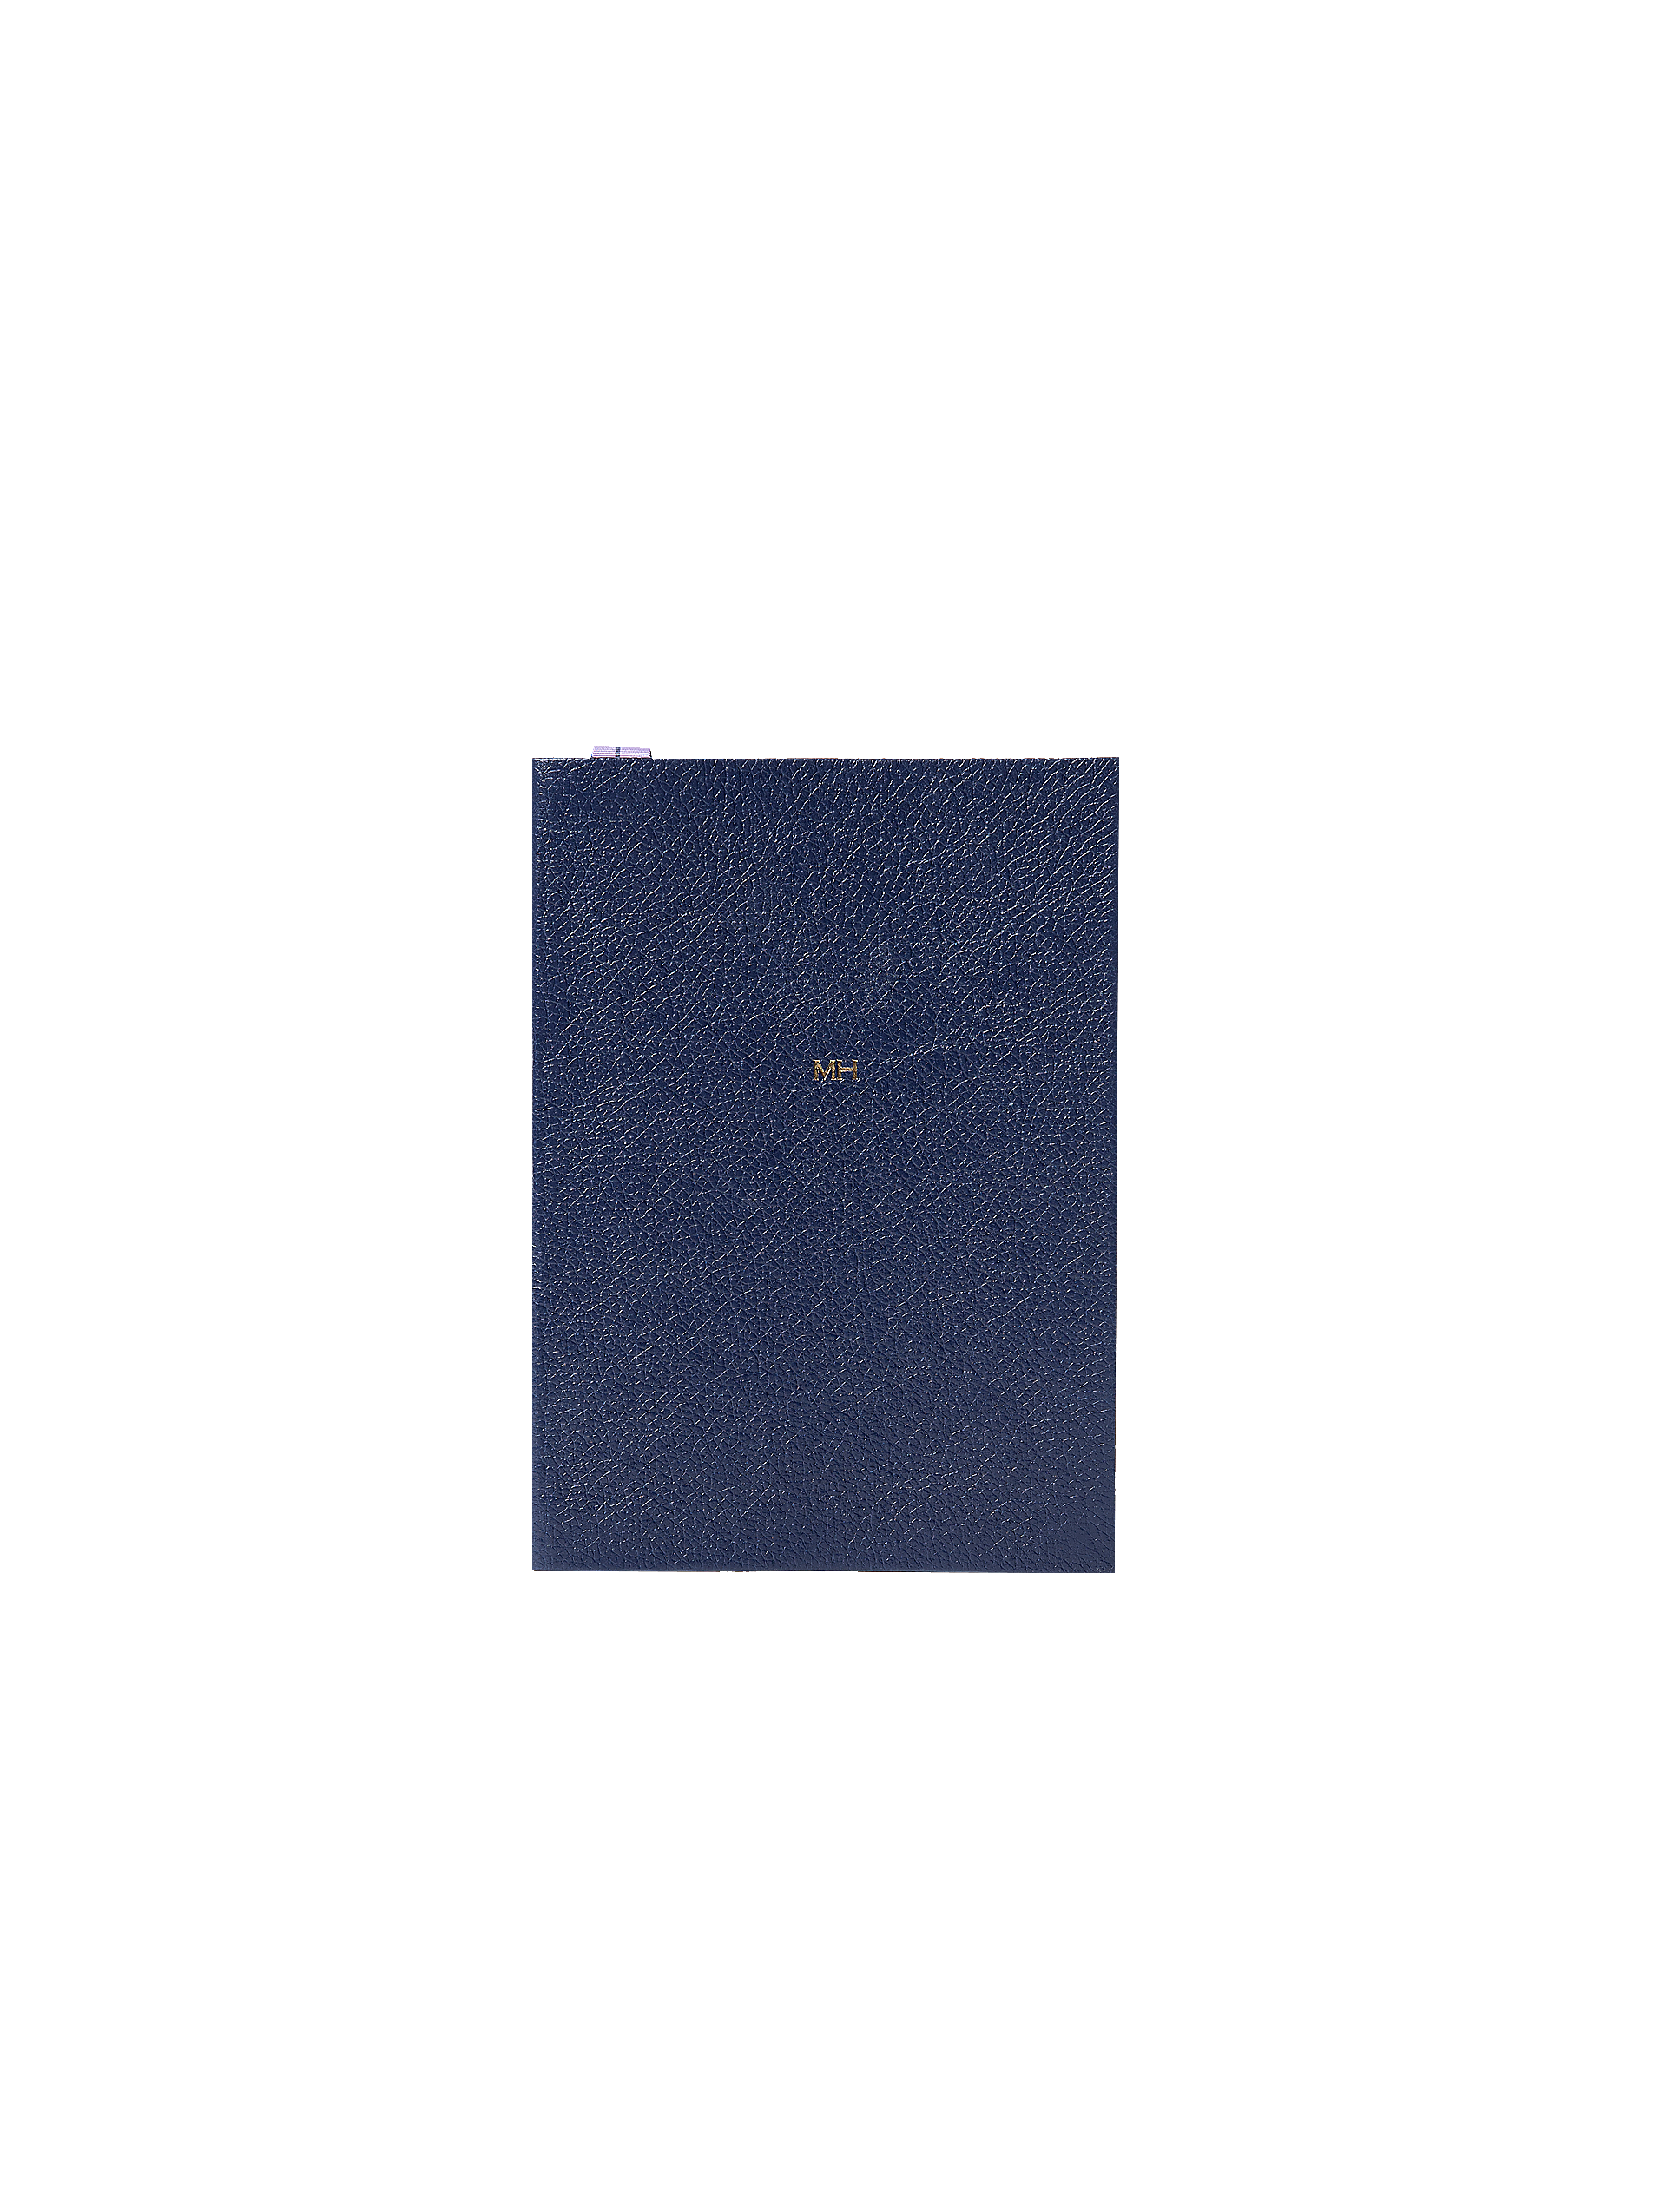 MISSION NOTEBOOK